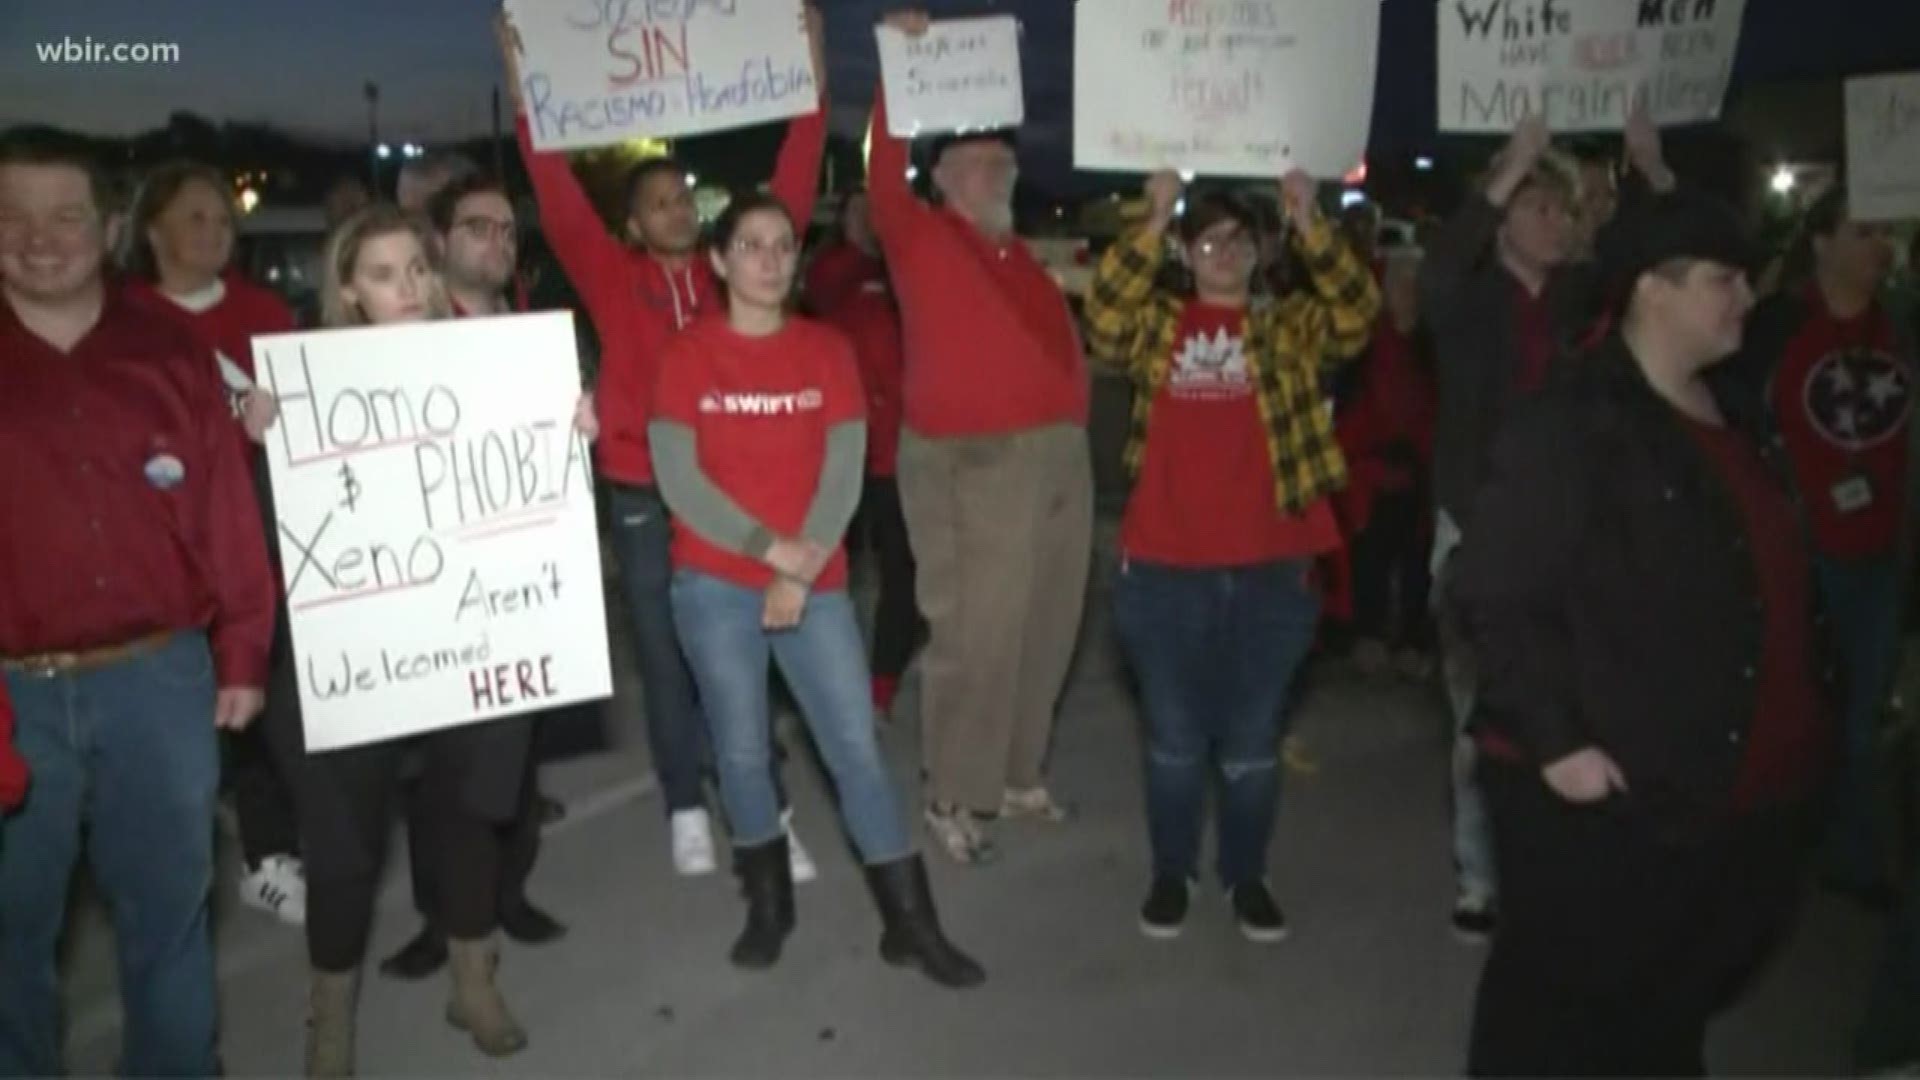 After Sevier County Commissioner Warren Hurst made comments about a "queer" running for presidents, protesters rallied outside the commission's Nov. 18 hearing.